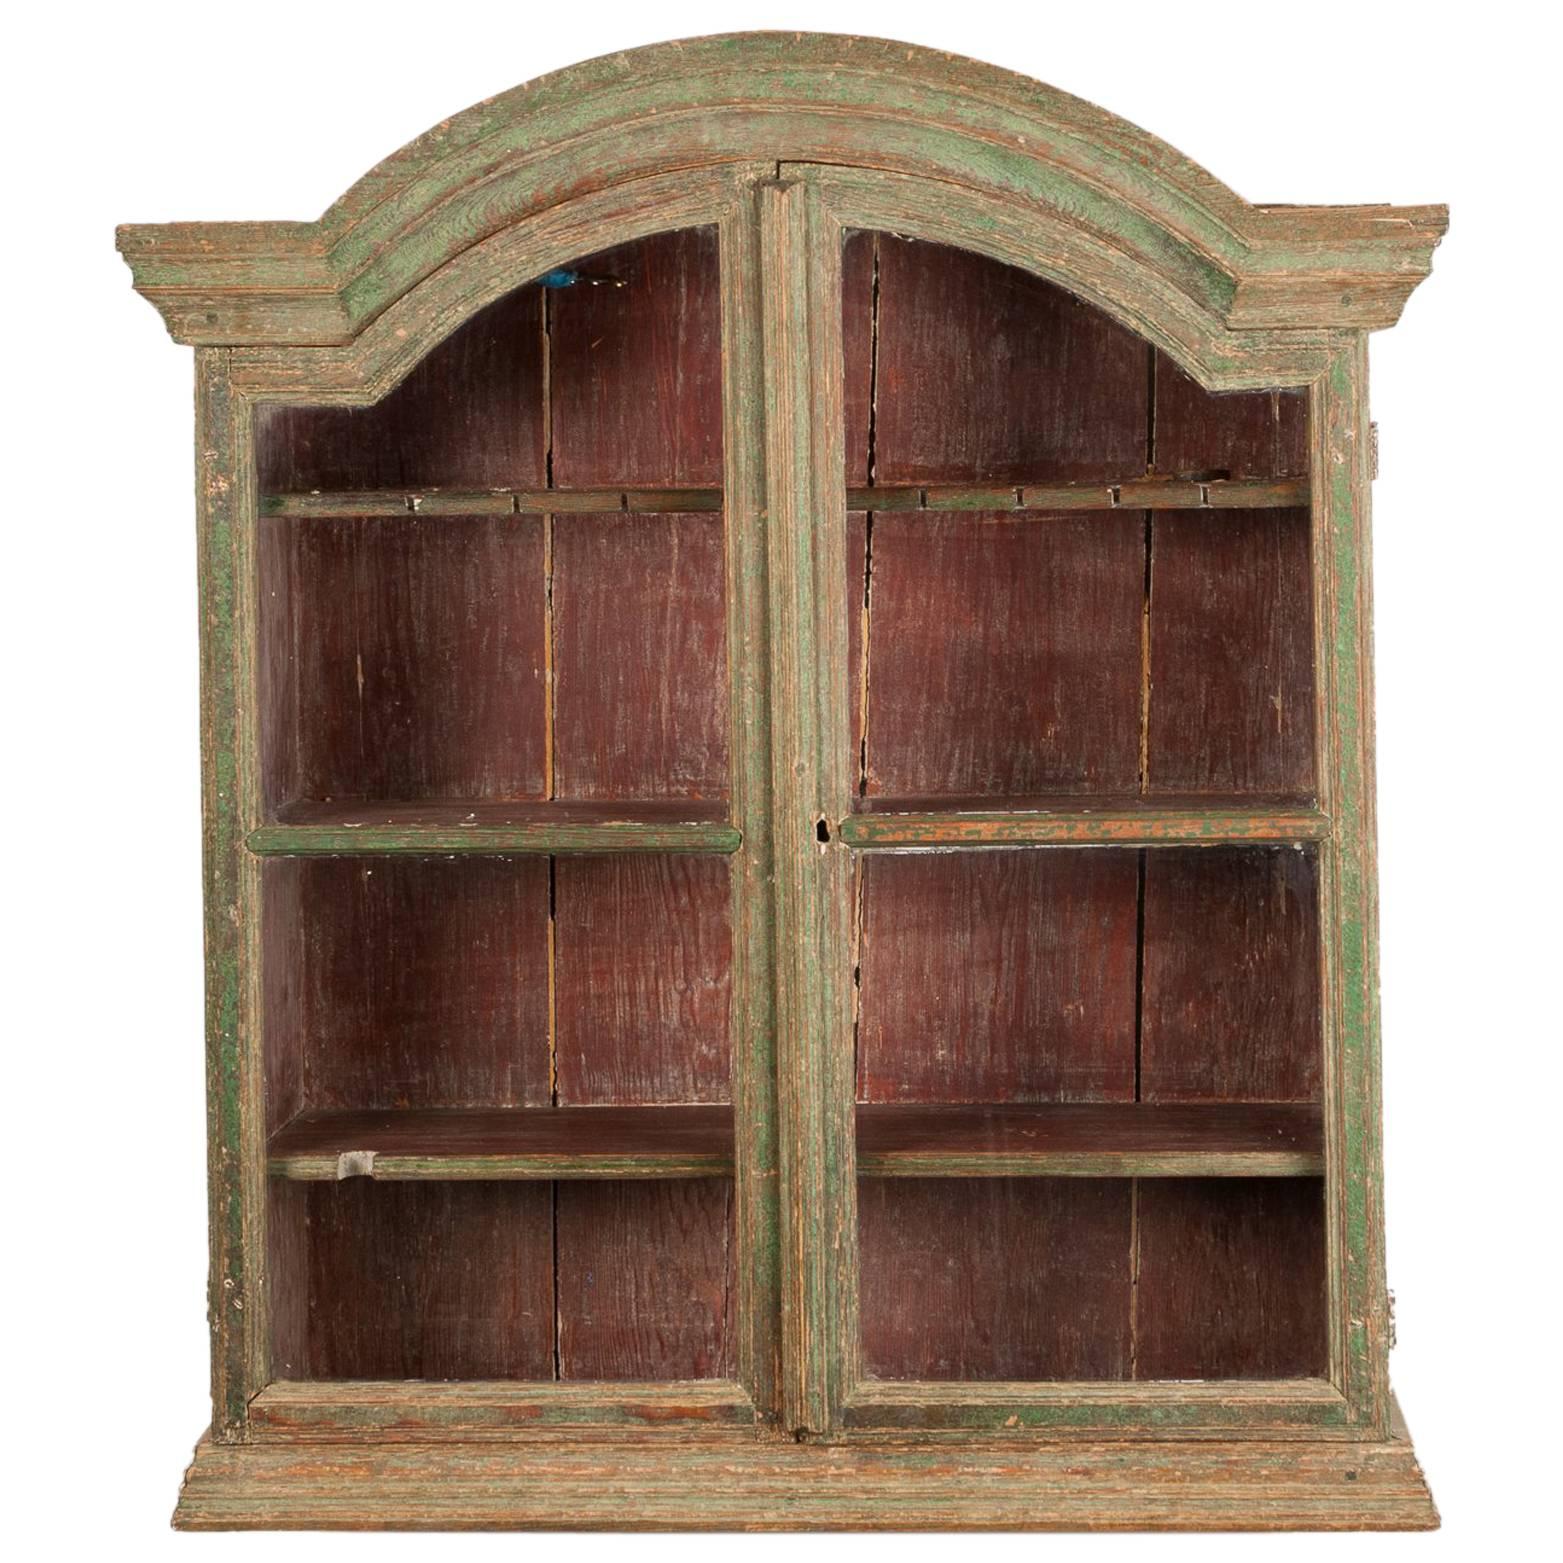 18th Century Wall Cabinet from the Rococo Period with Showcase Doors